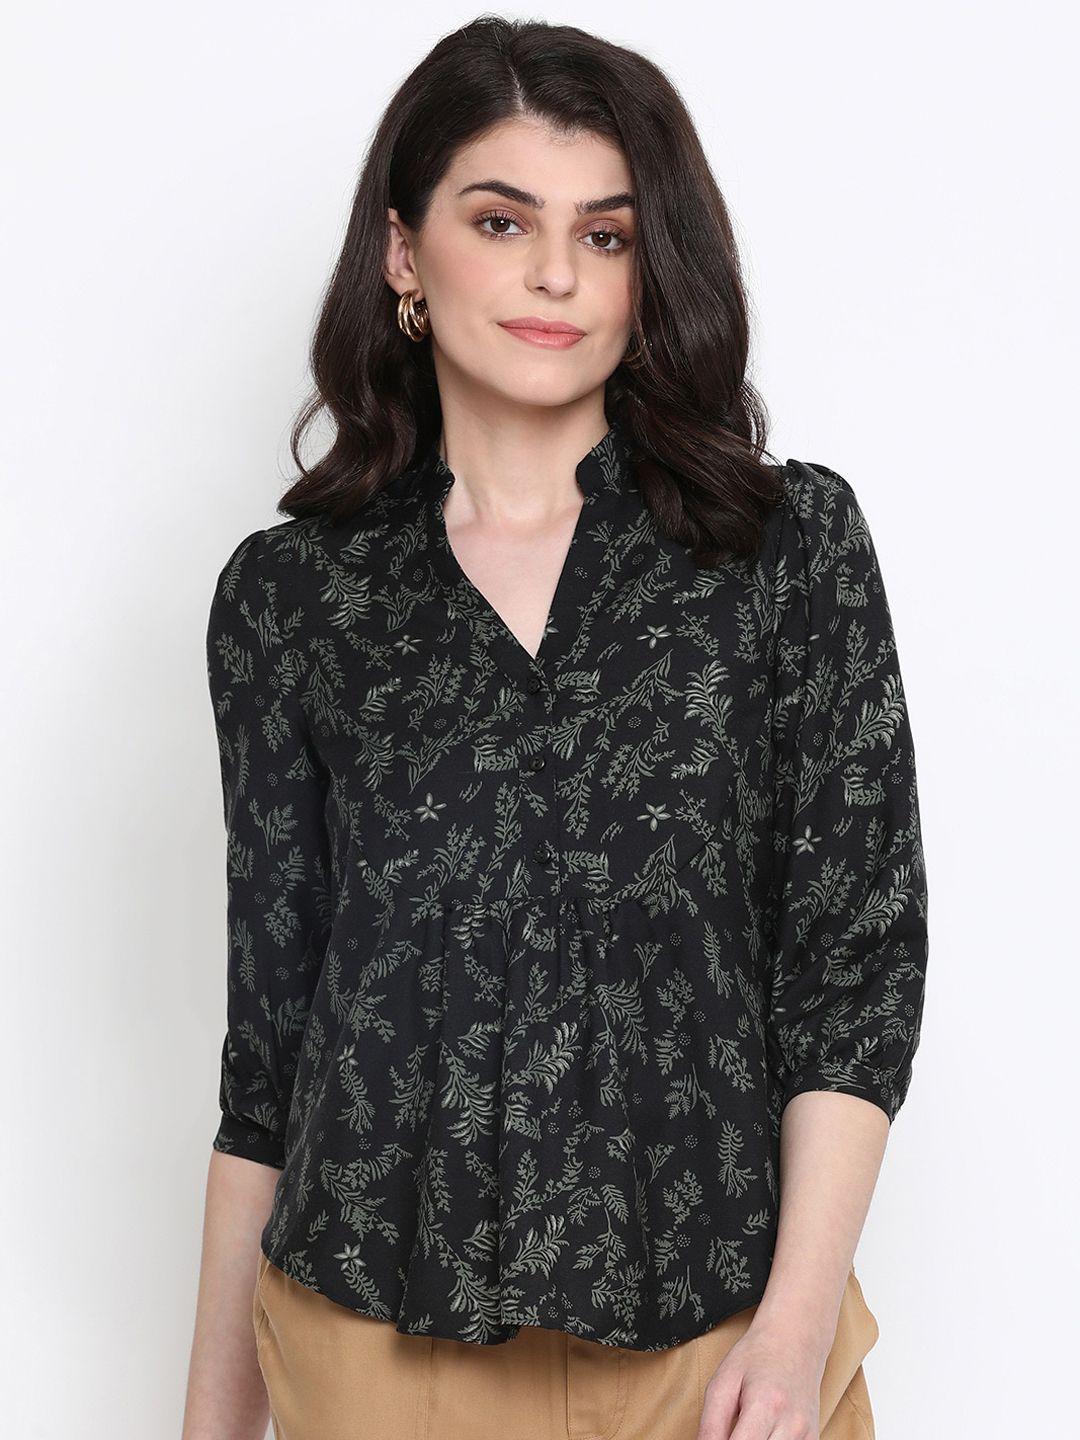 oxolloxo women green & grey floral printed shirt style top